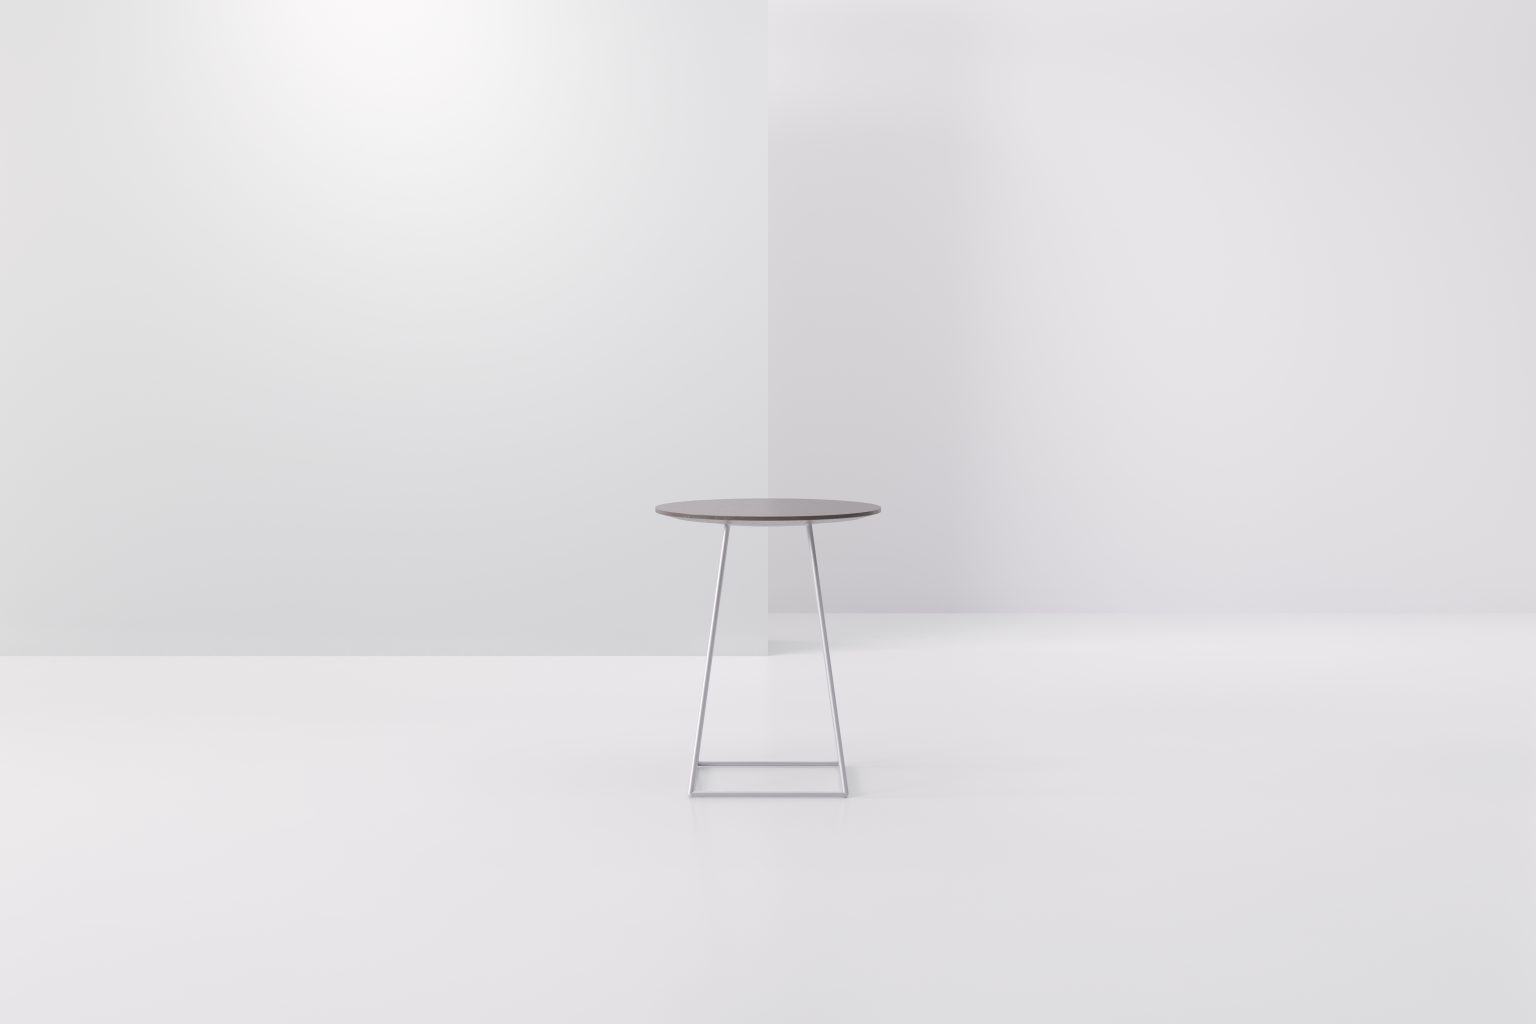 Dayton Small Round End Table Product Image 2